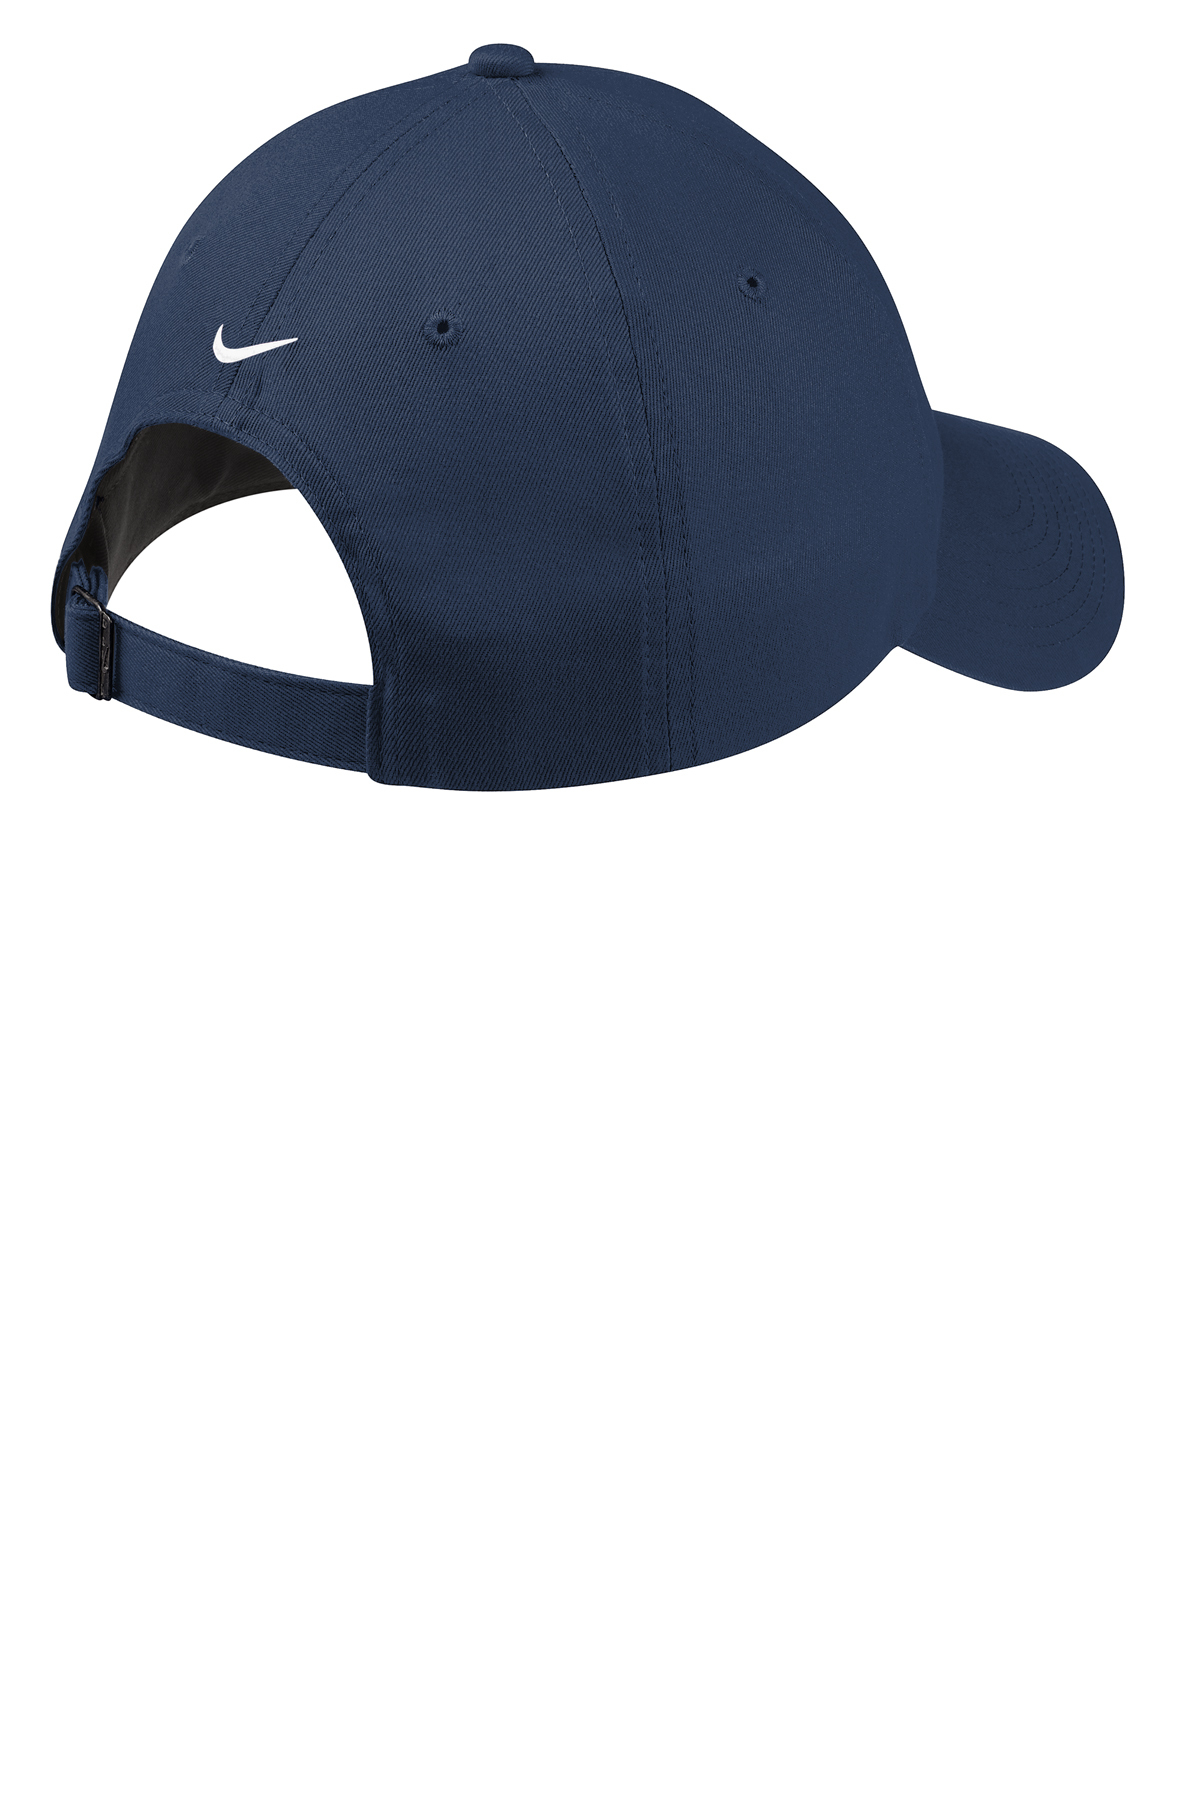 Nike Unstructured Cotton/Poly Twill Cap | Product | SanMar